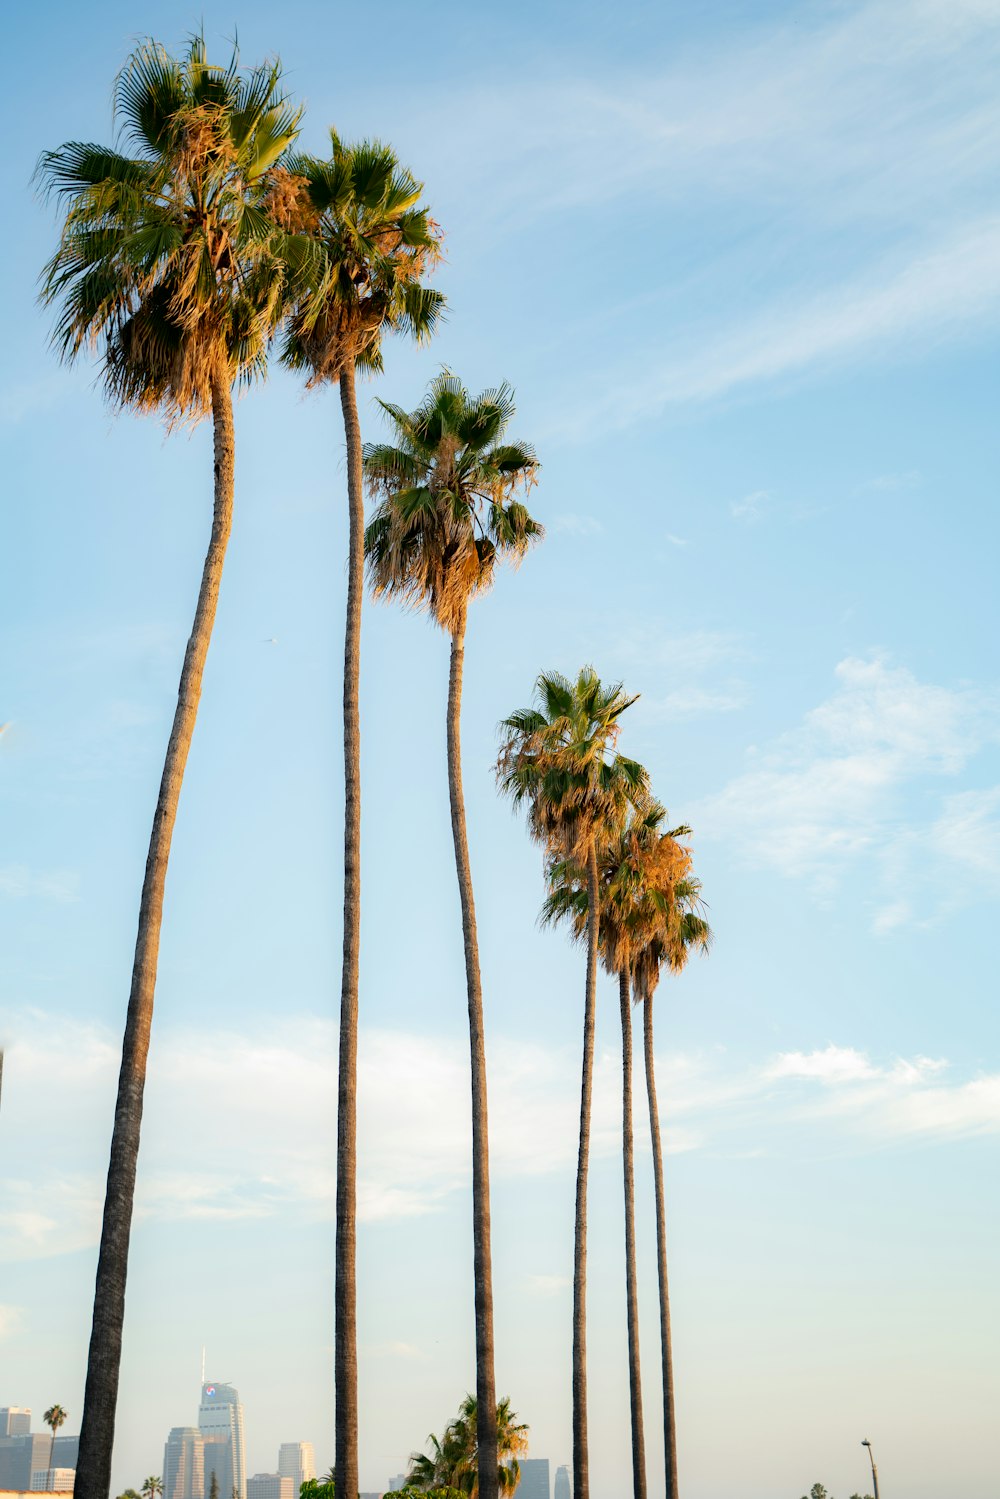 palm trees under blue sky during daytime